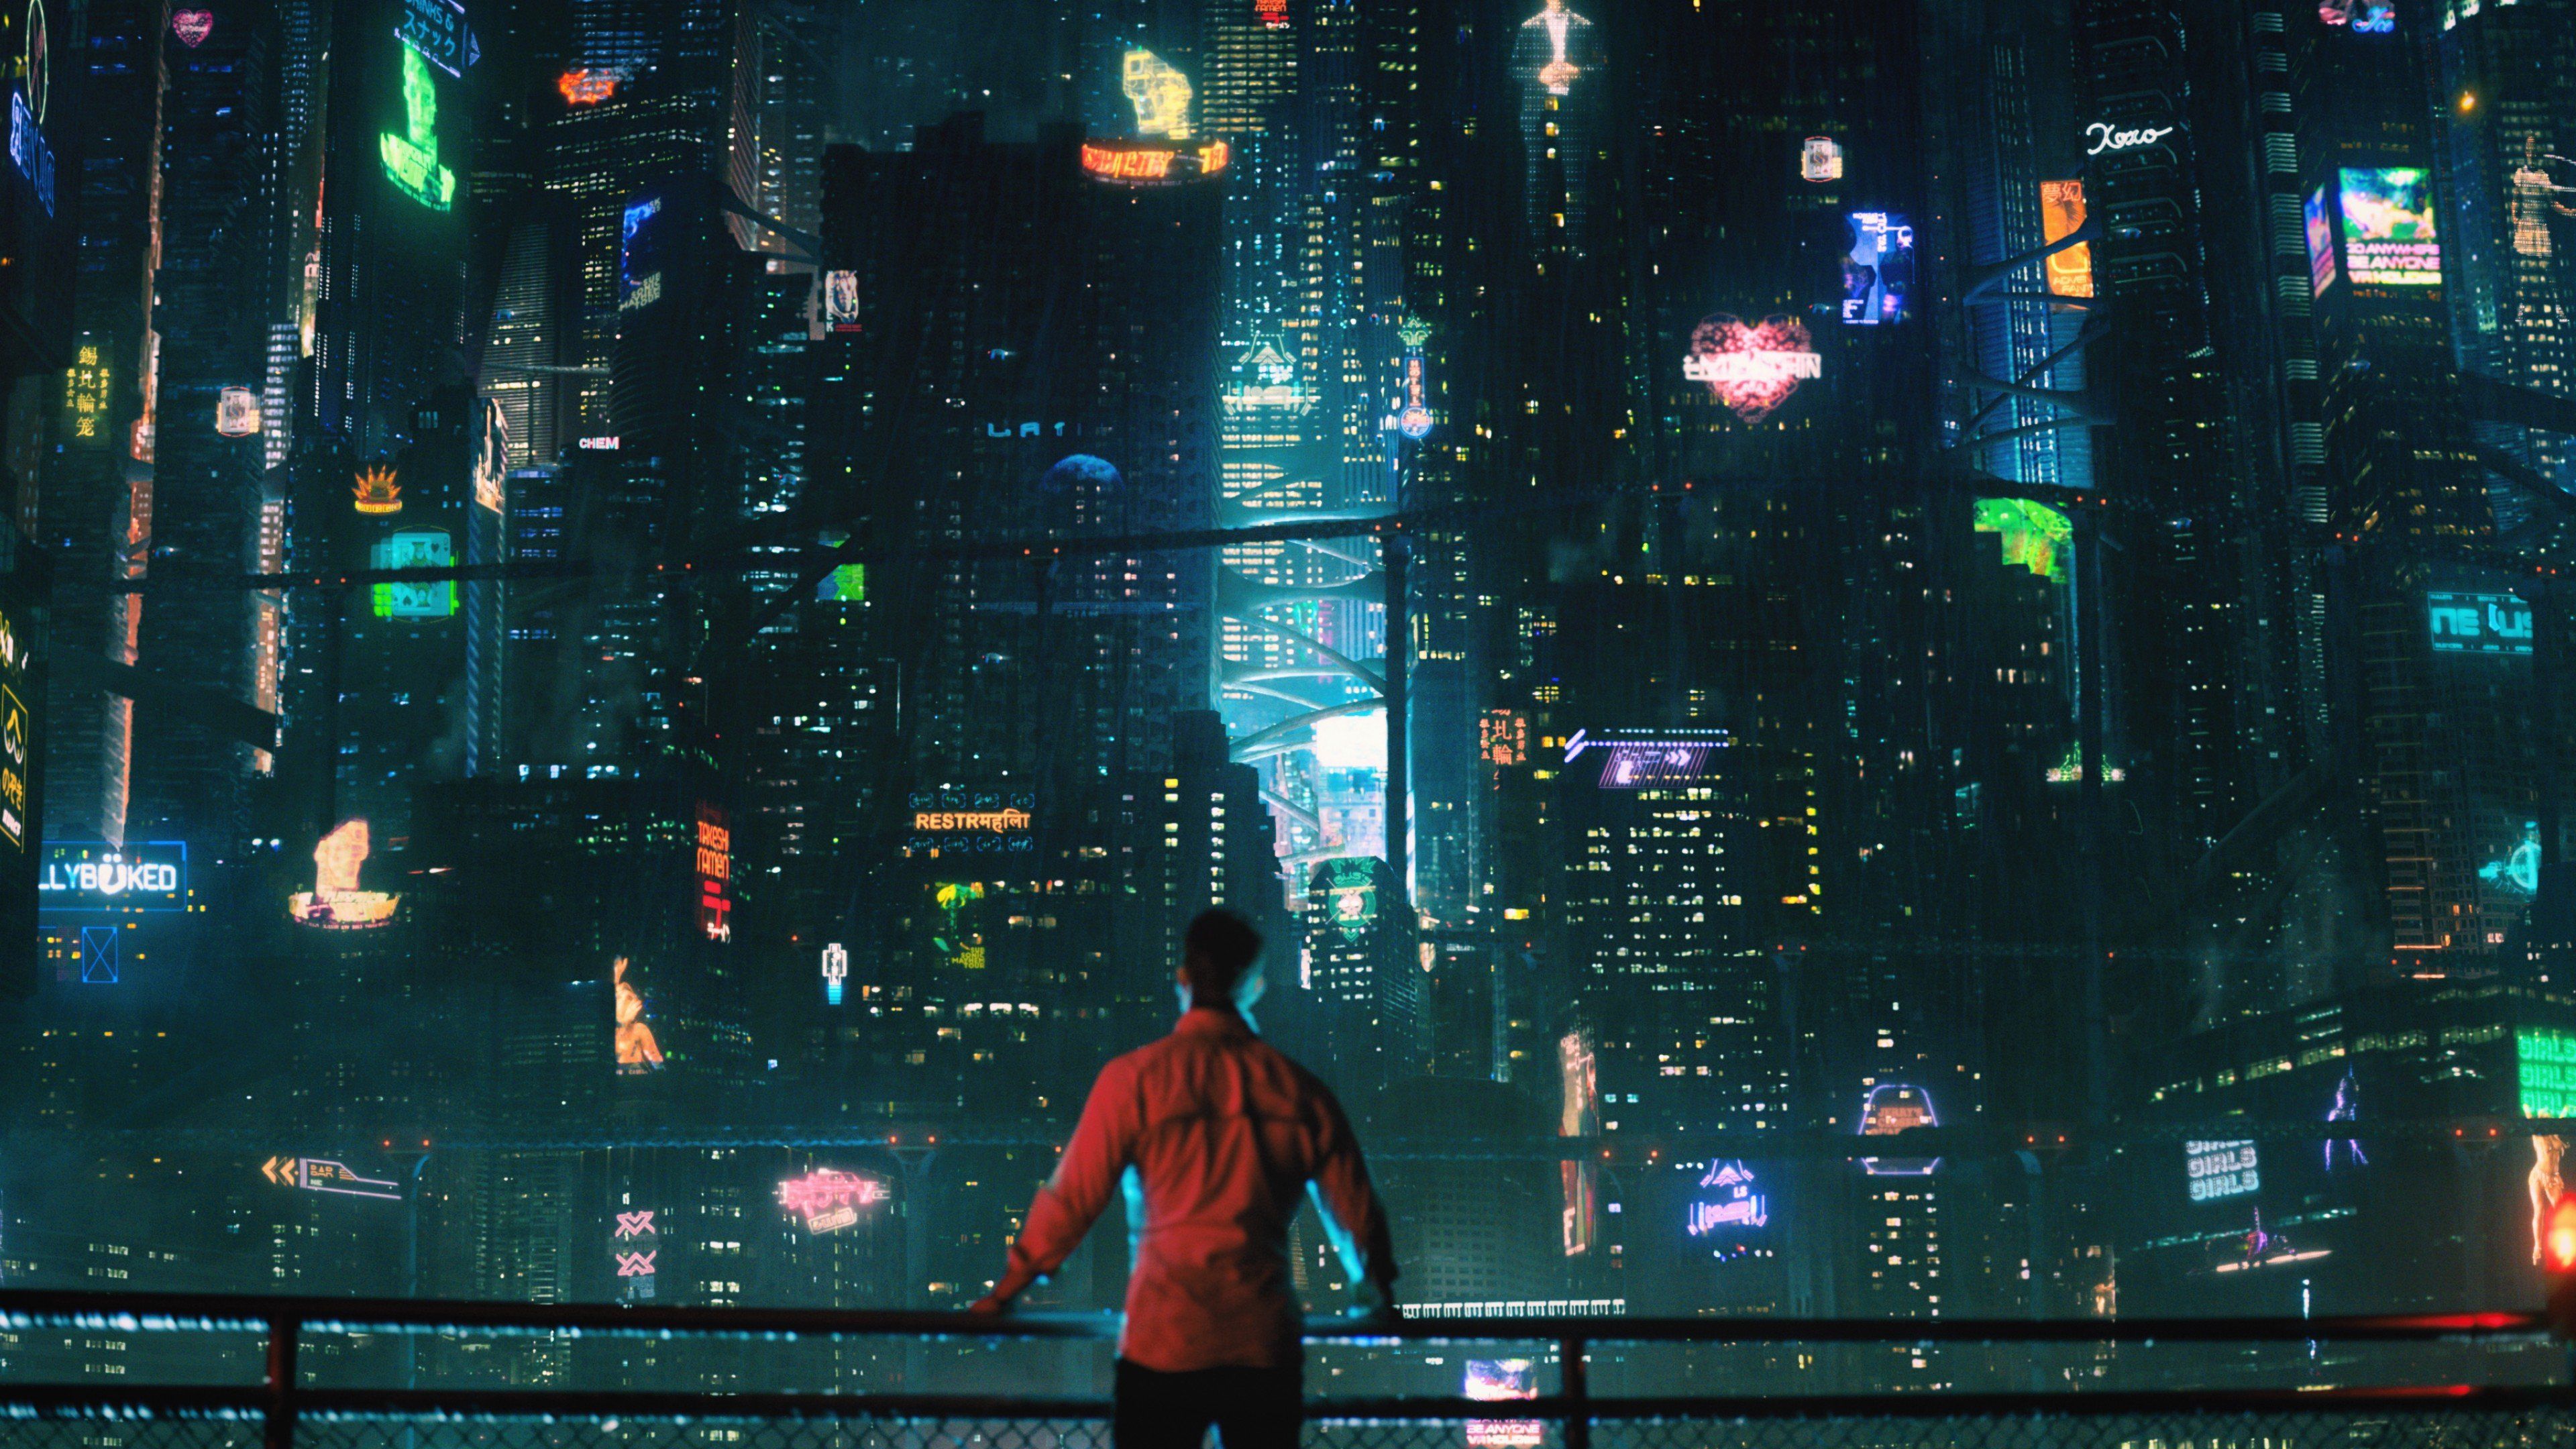 Cyberpunk 2077 Your Night City Wallpapers